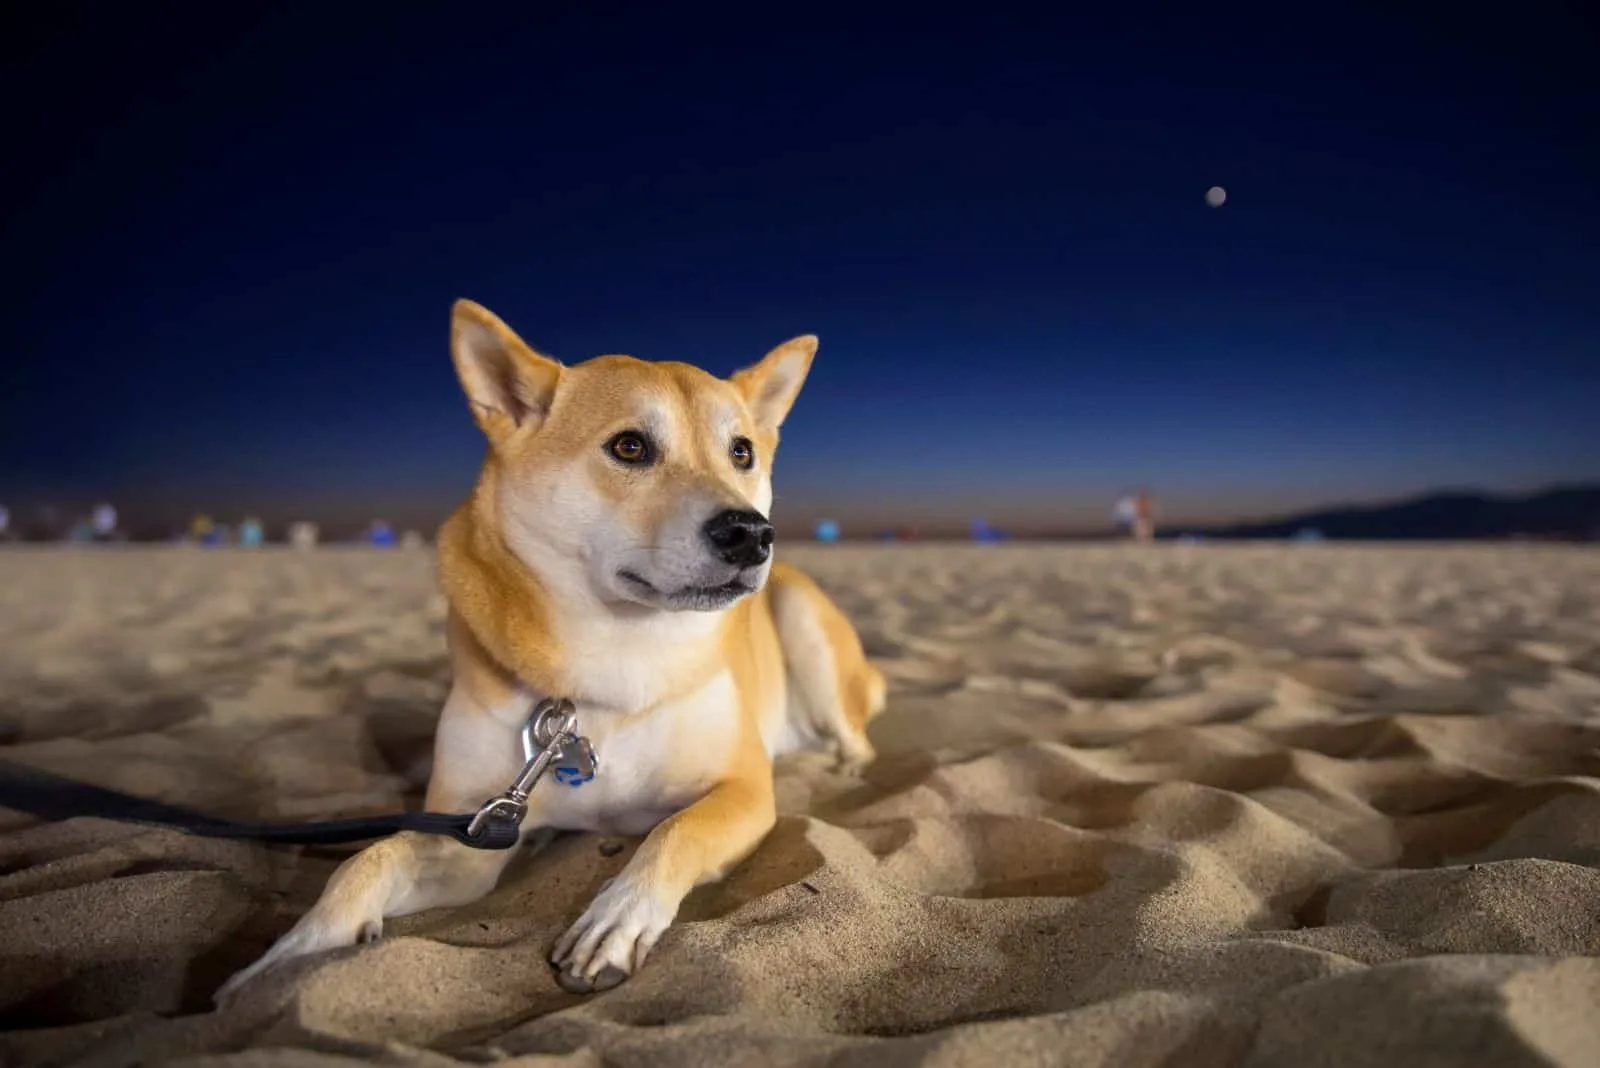 shiba inu on the beach lying down with a leash in the night